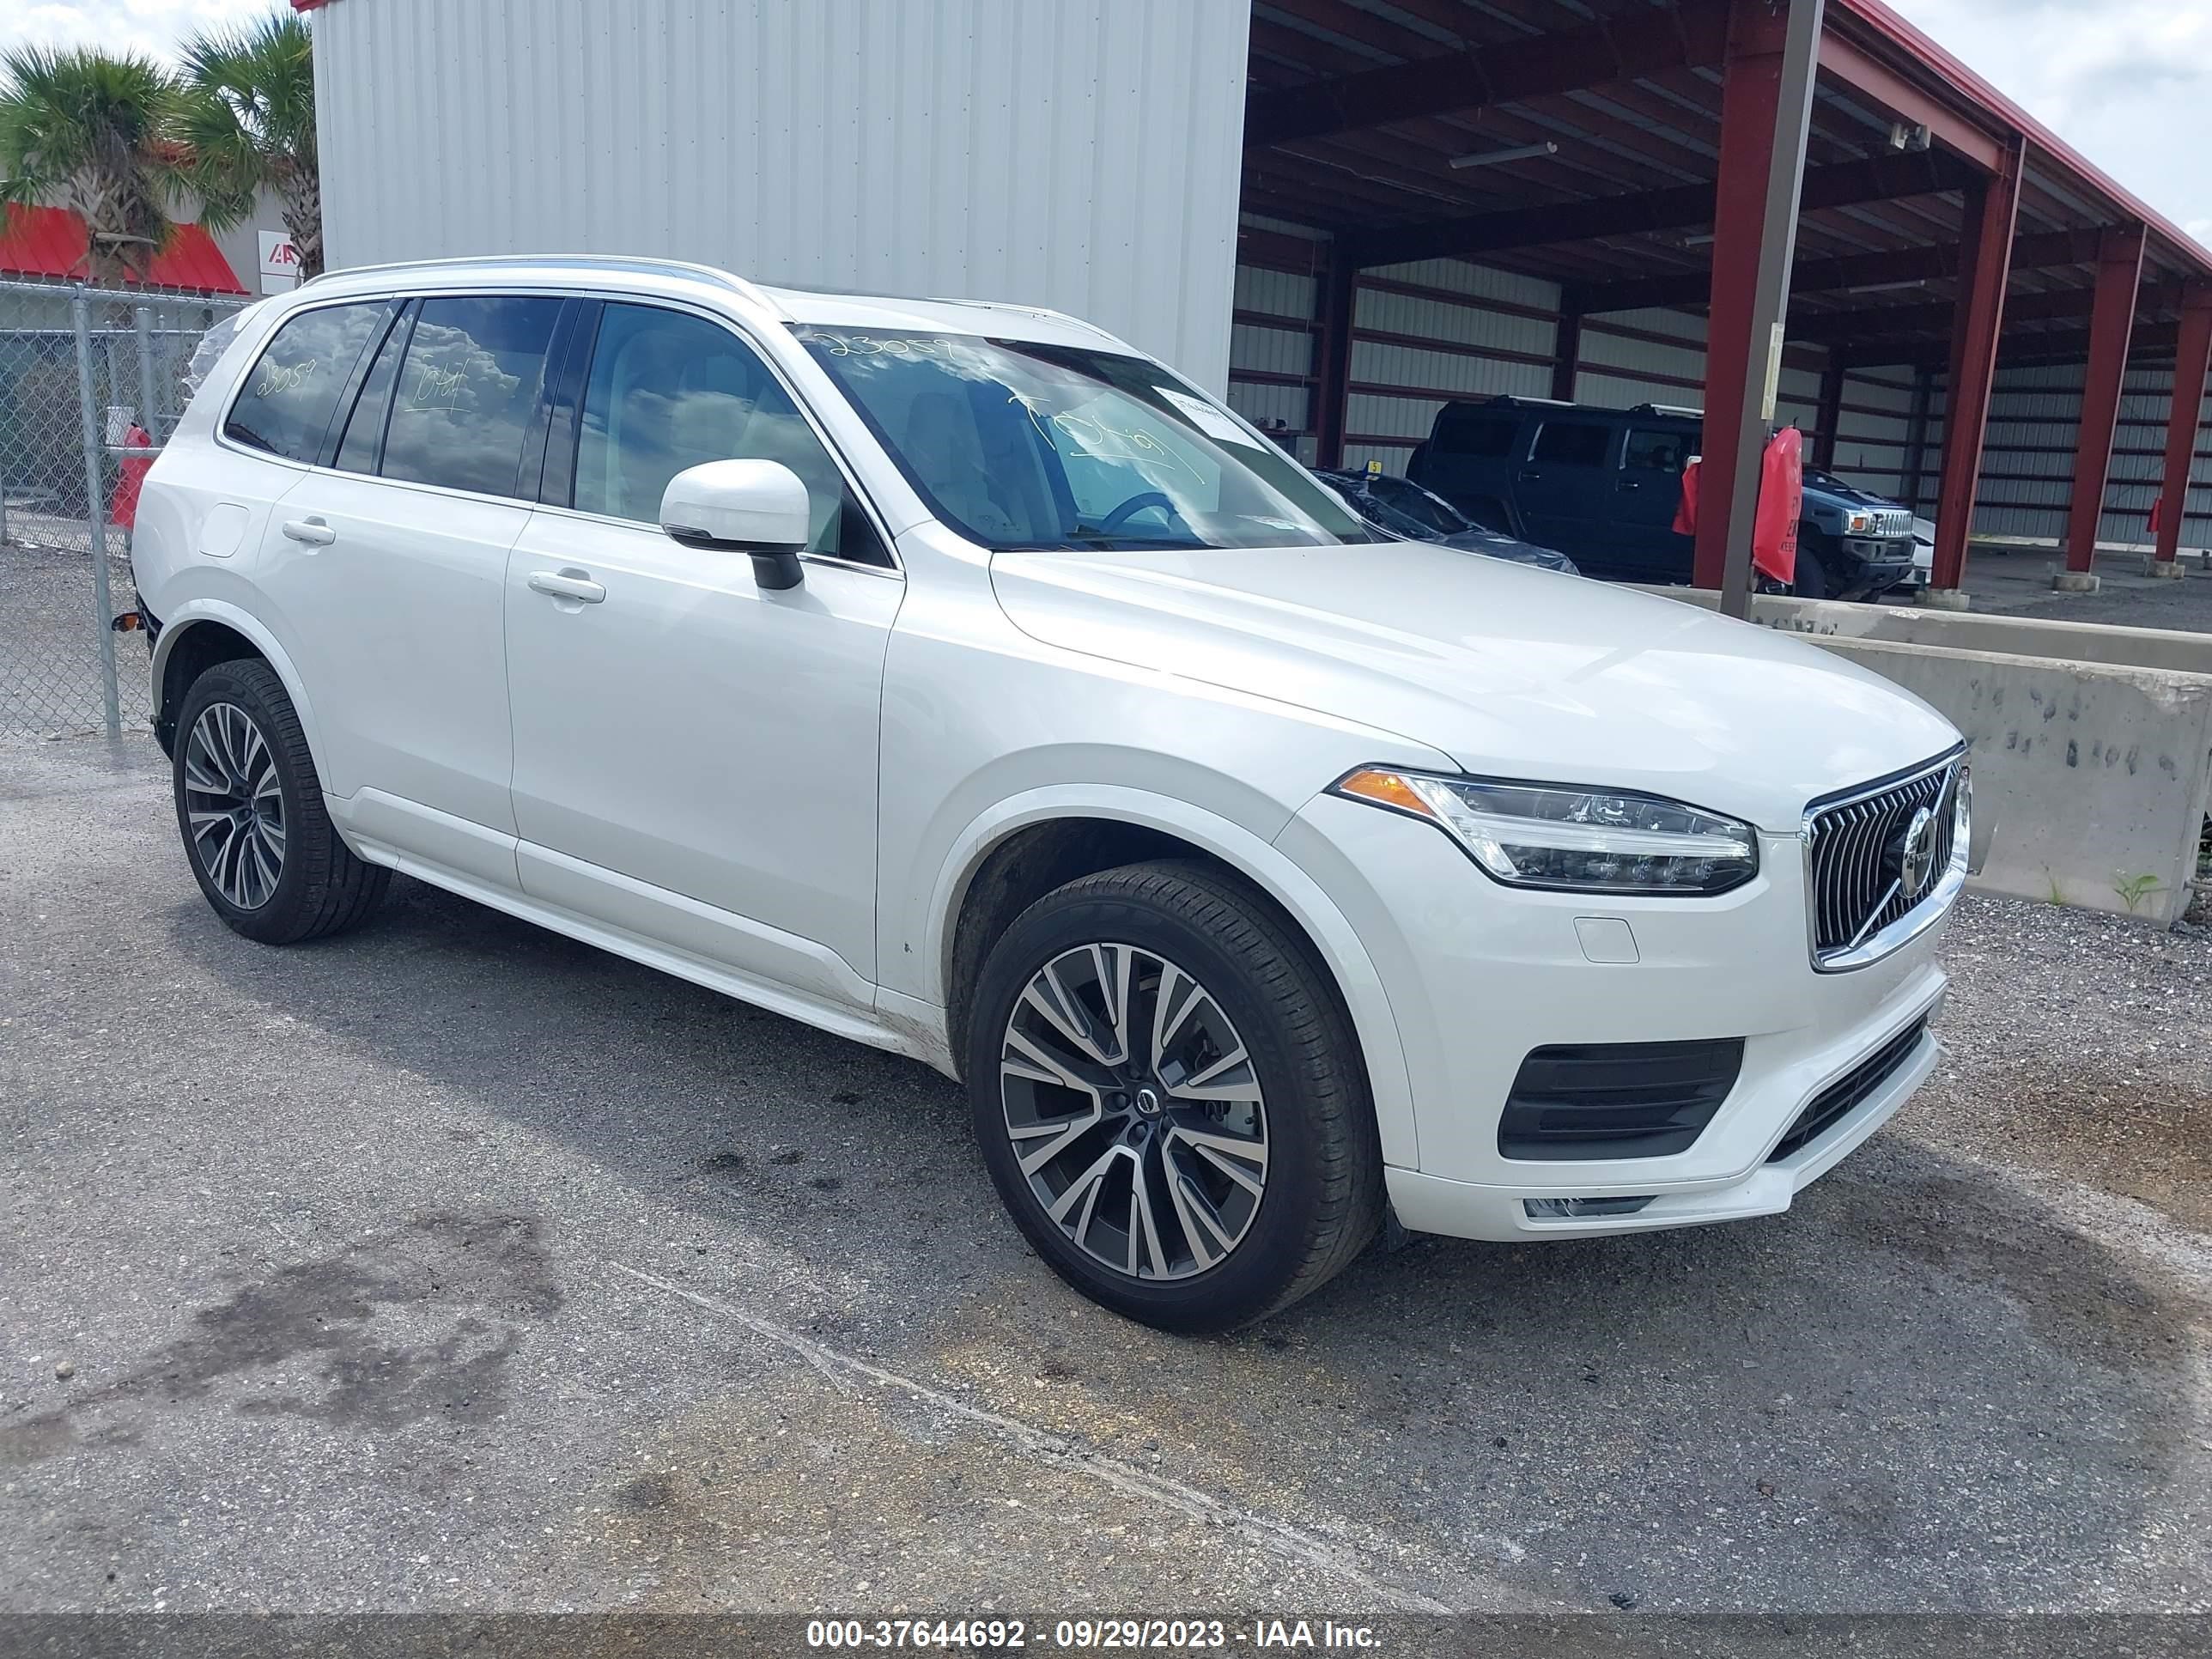 vin: YV4102CK3M1727207 YV4102CK3M1727207 2021 volvo xc90 2000 for Sale in 33478, 14344 Corporate Rd S, Jupiter, USA